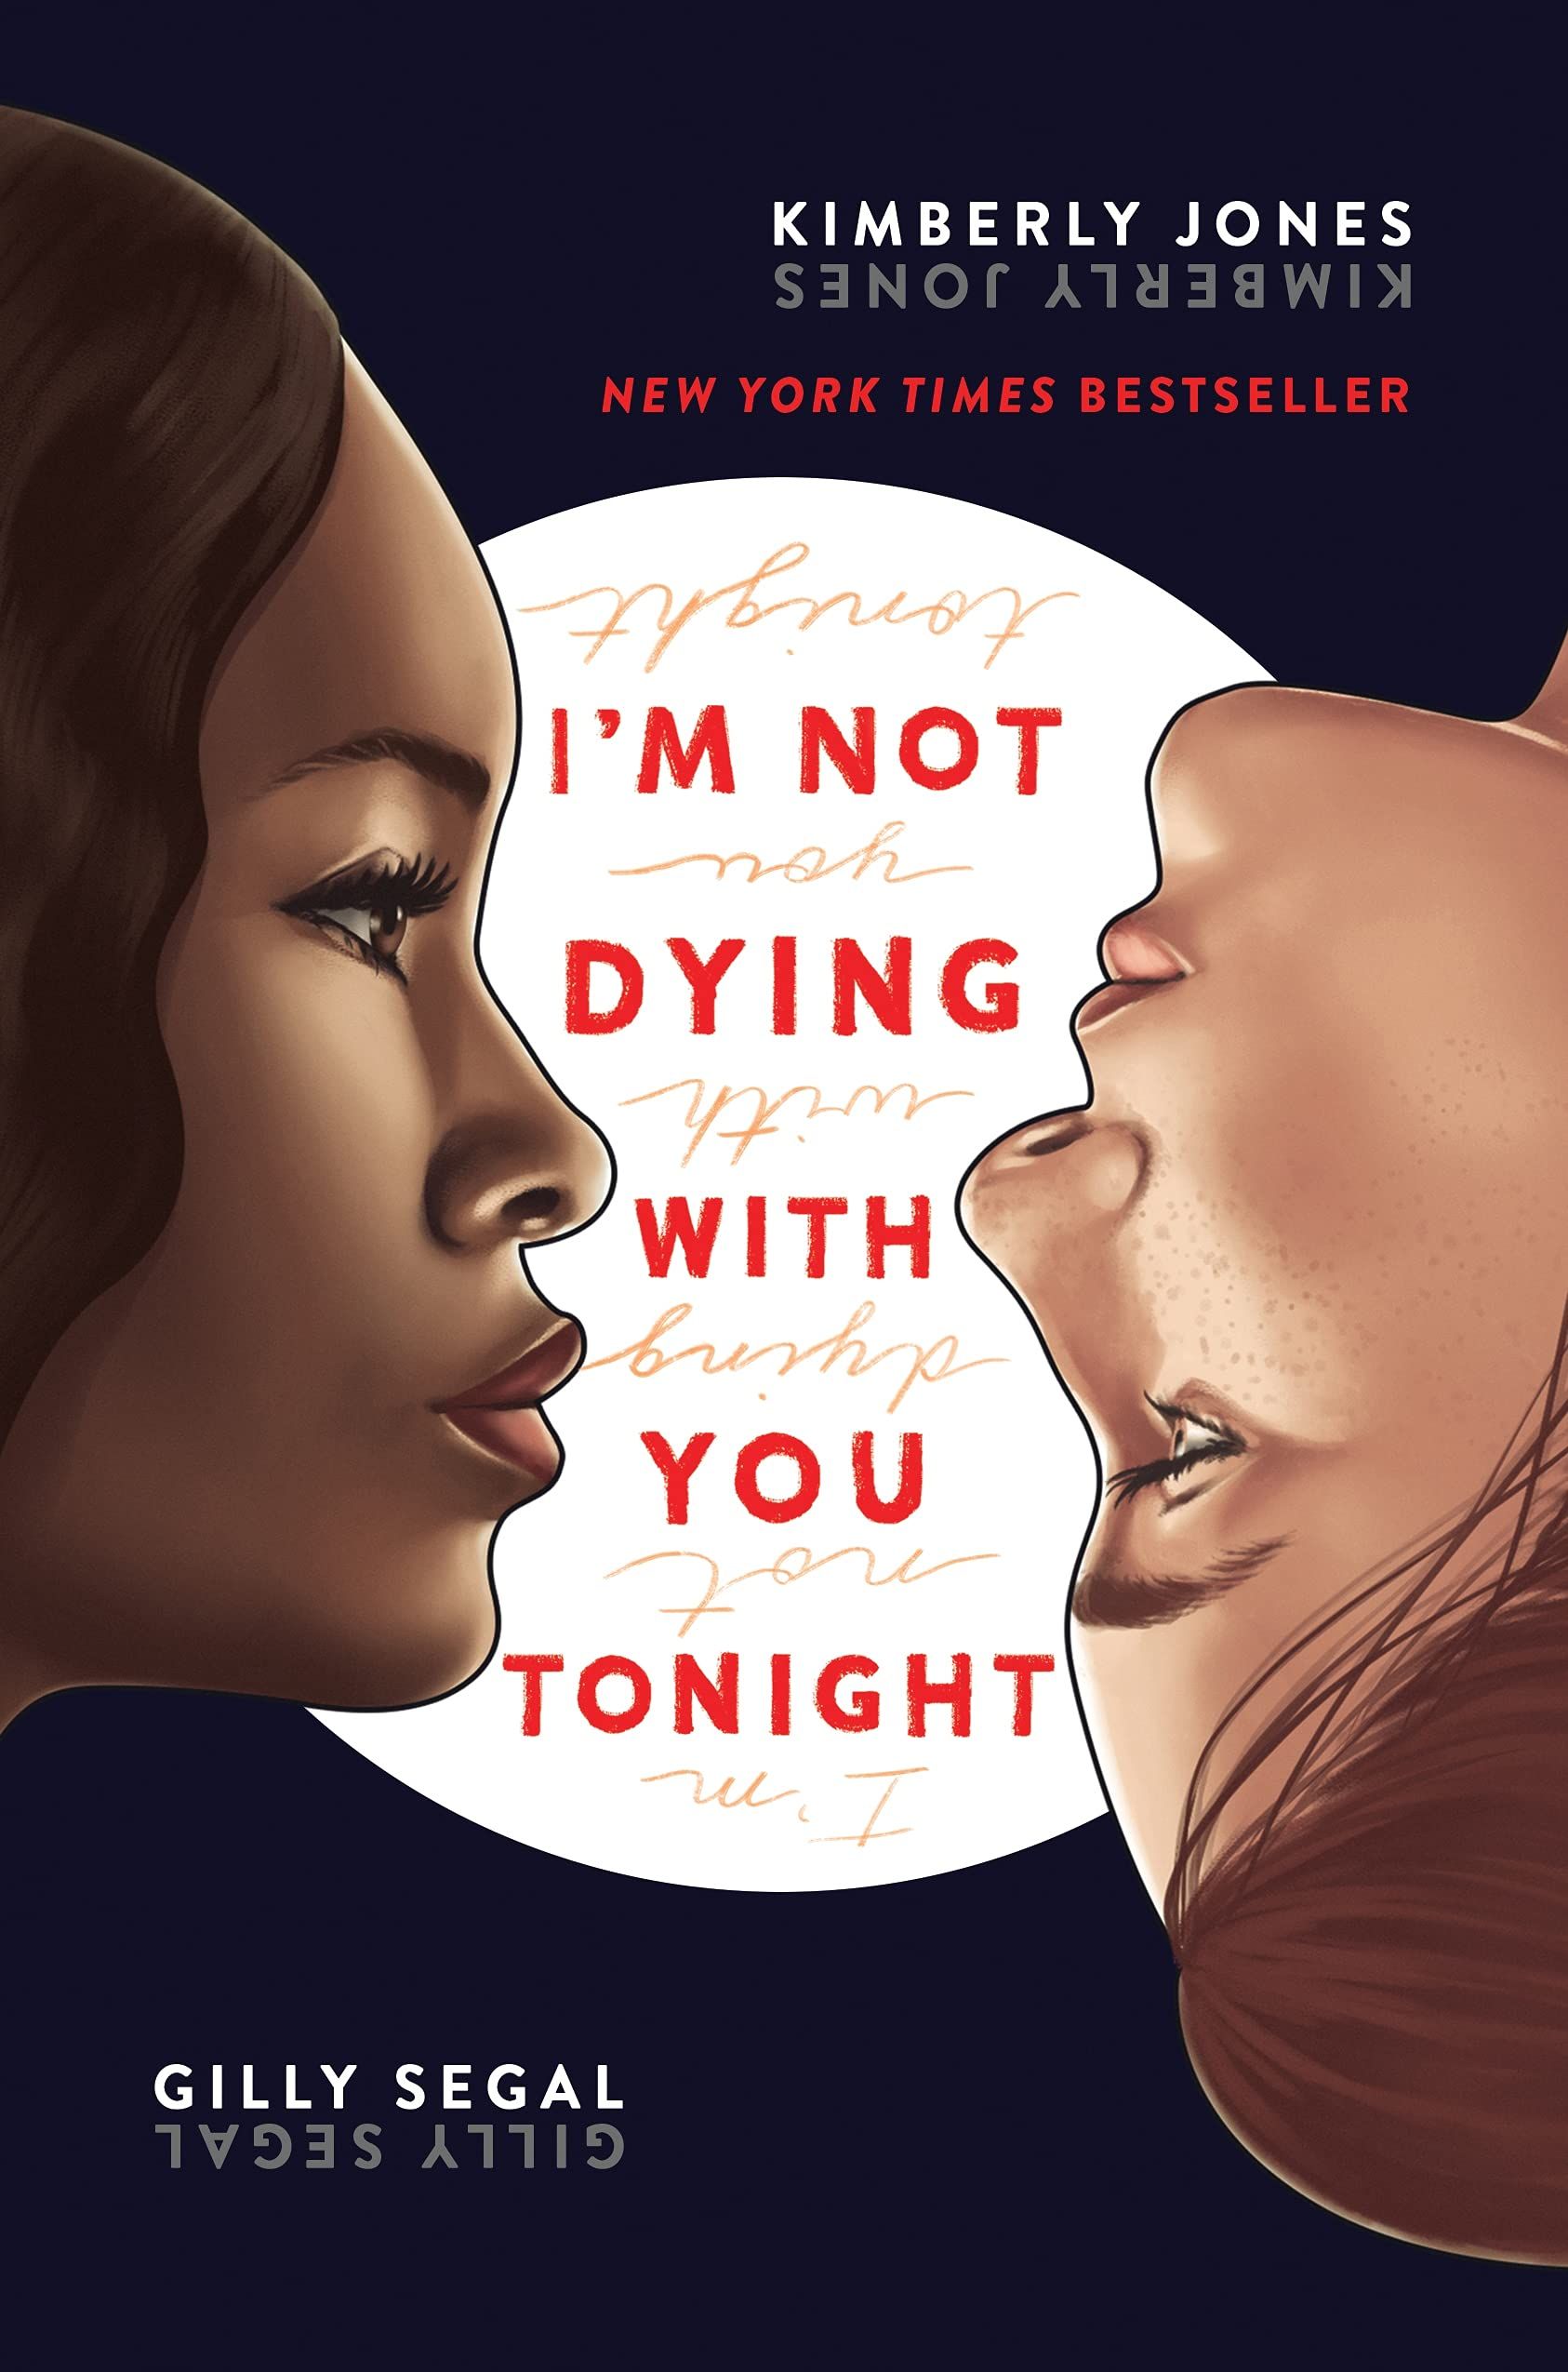 Cover Image of "I'm Not Dying With You Tonight" by Kimberly Jones and Gilly Segal.